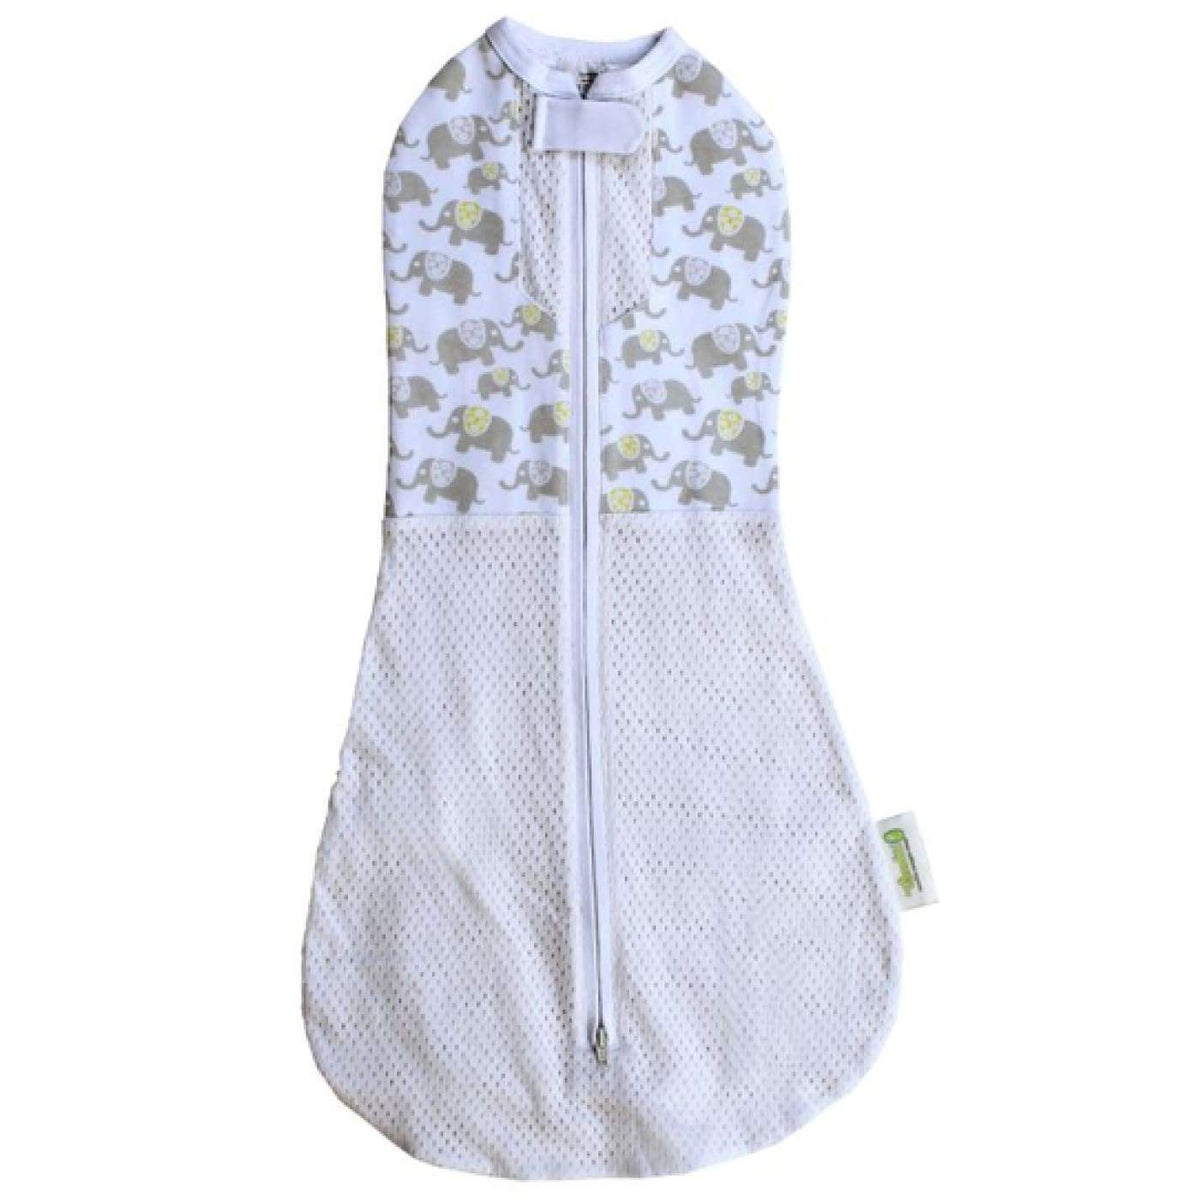 Woombie Summer Convertible Happy Elephants - Big Baby - Manchester - Swaddles and Wraps